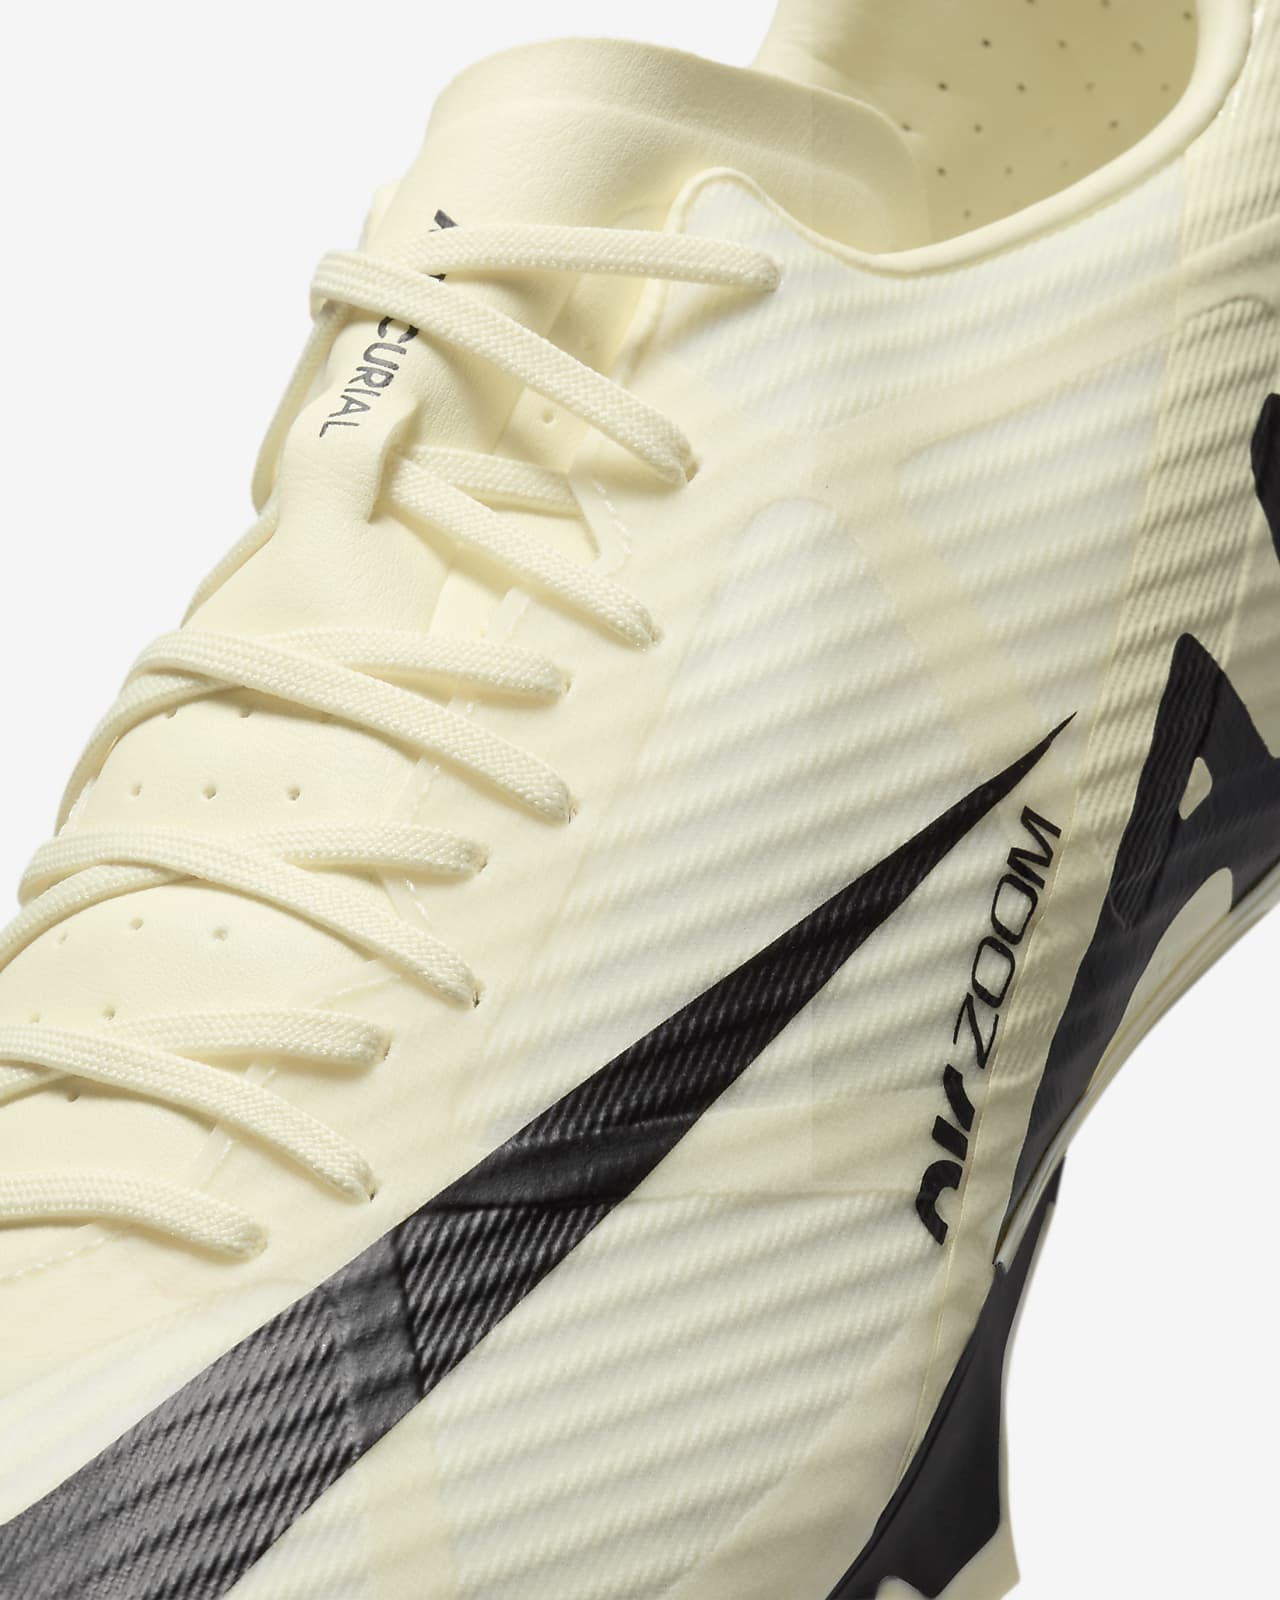 Nike Mercurial Vapor 15 Academy Multi-Ground Low-Top Soccer Cleats